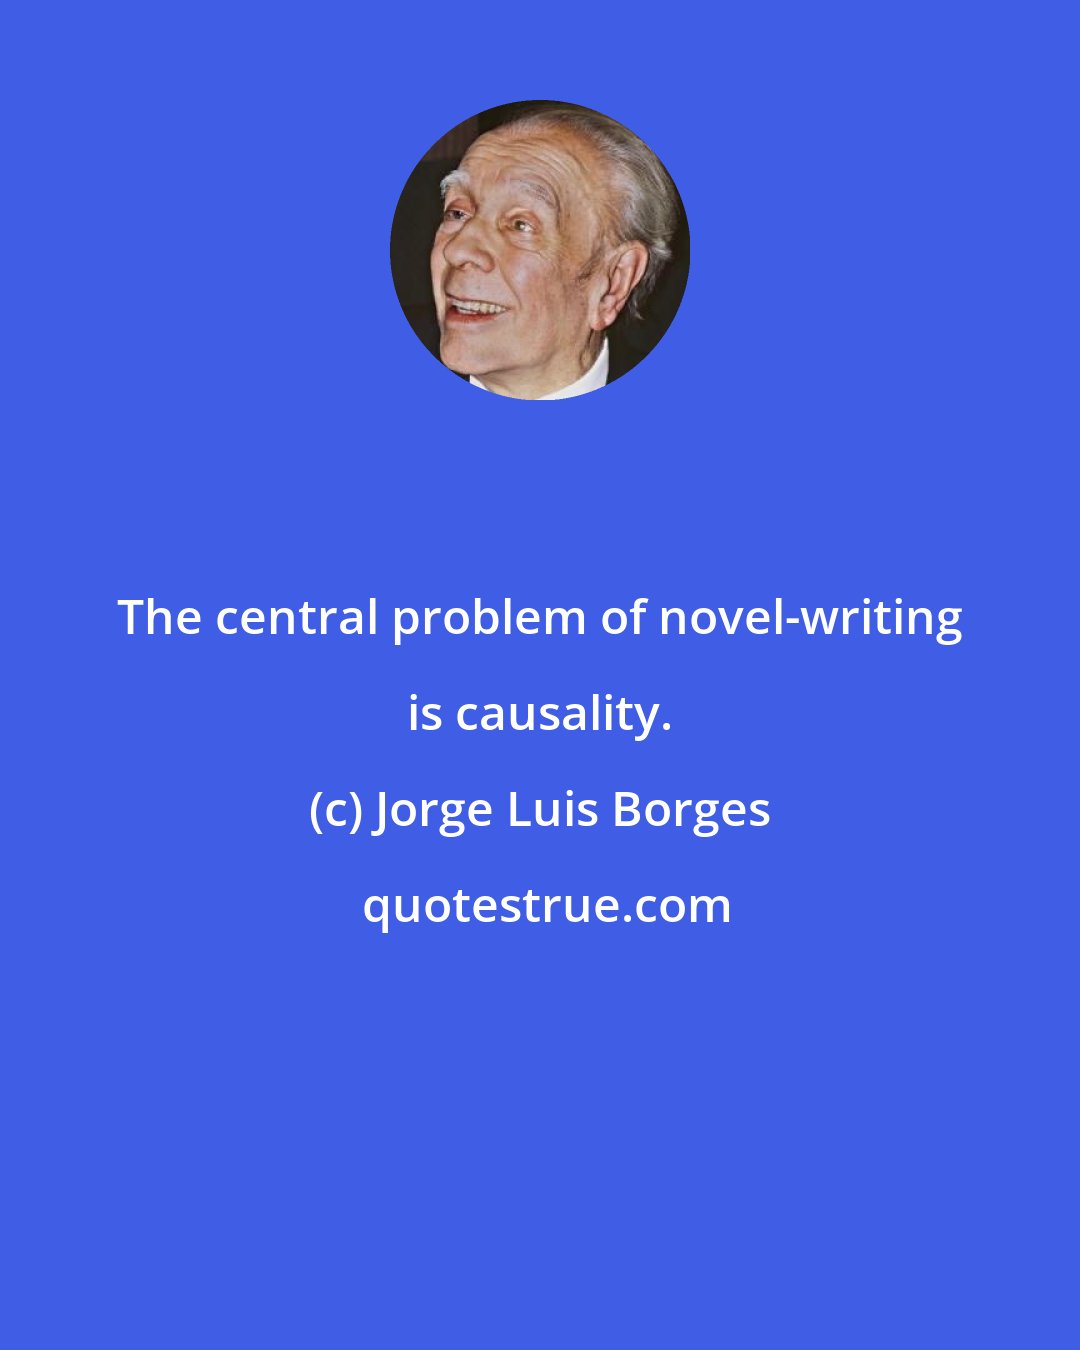 Jorge Luis Borges: The central problem of novel-writing is causality.